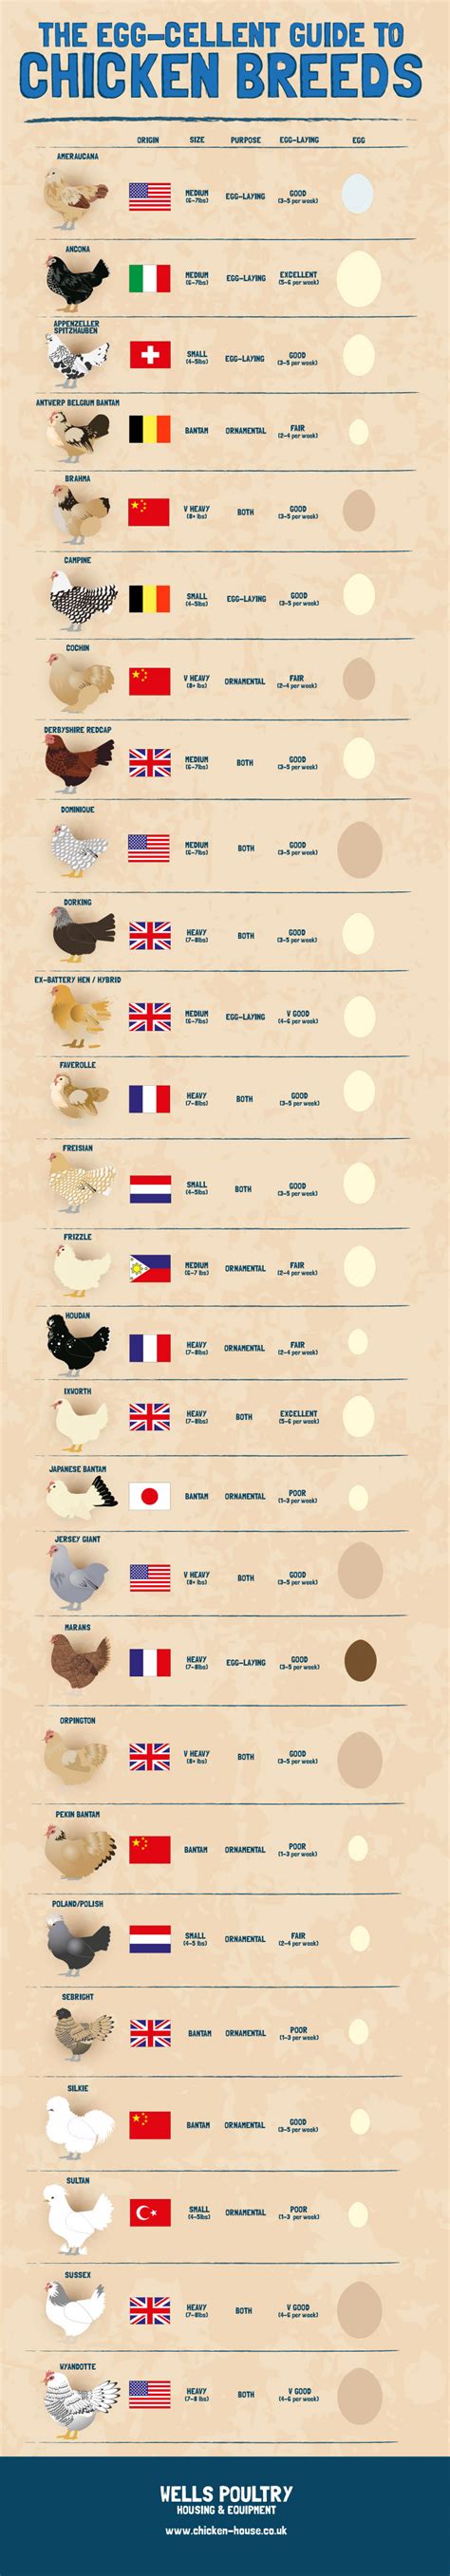 The Egg Cellent Guide To Chicken Breeds Visually